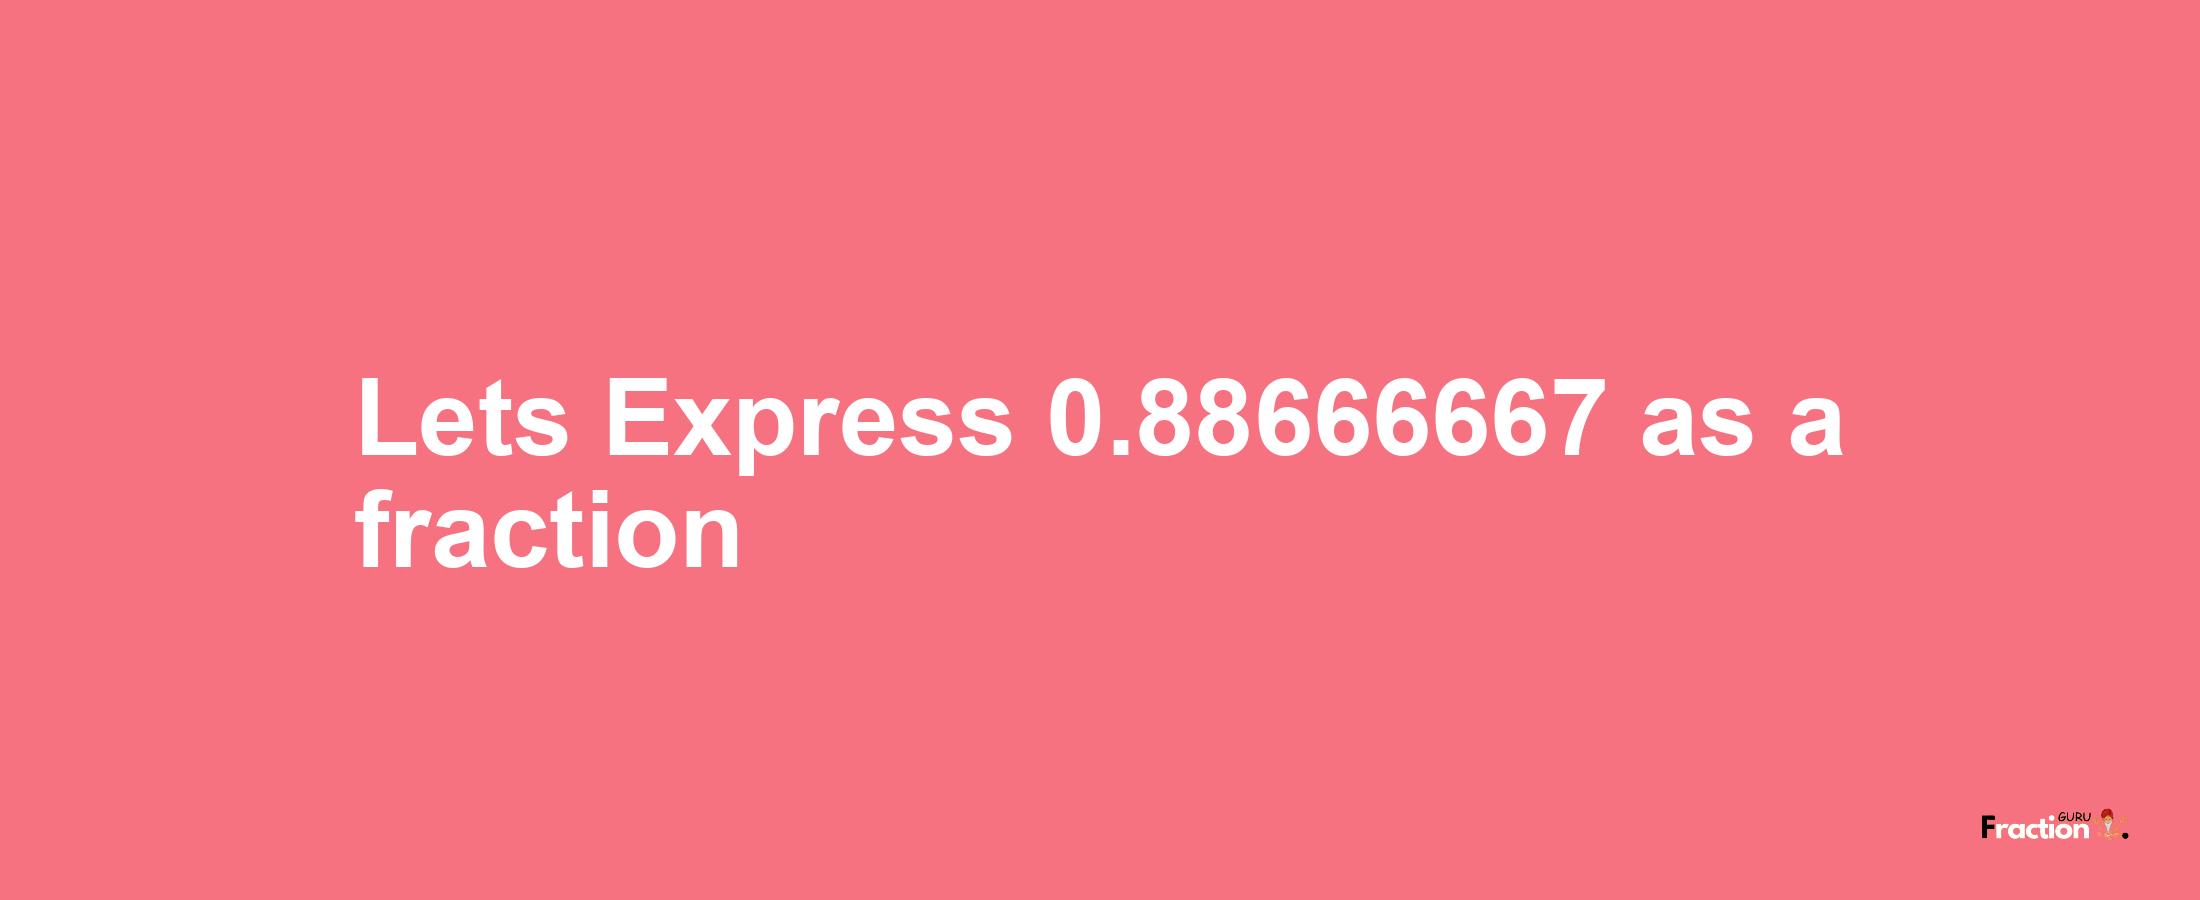 Lets Express 0.88666667 as afraction